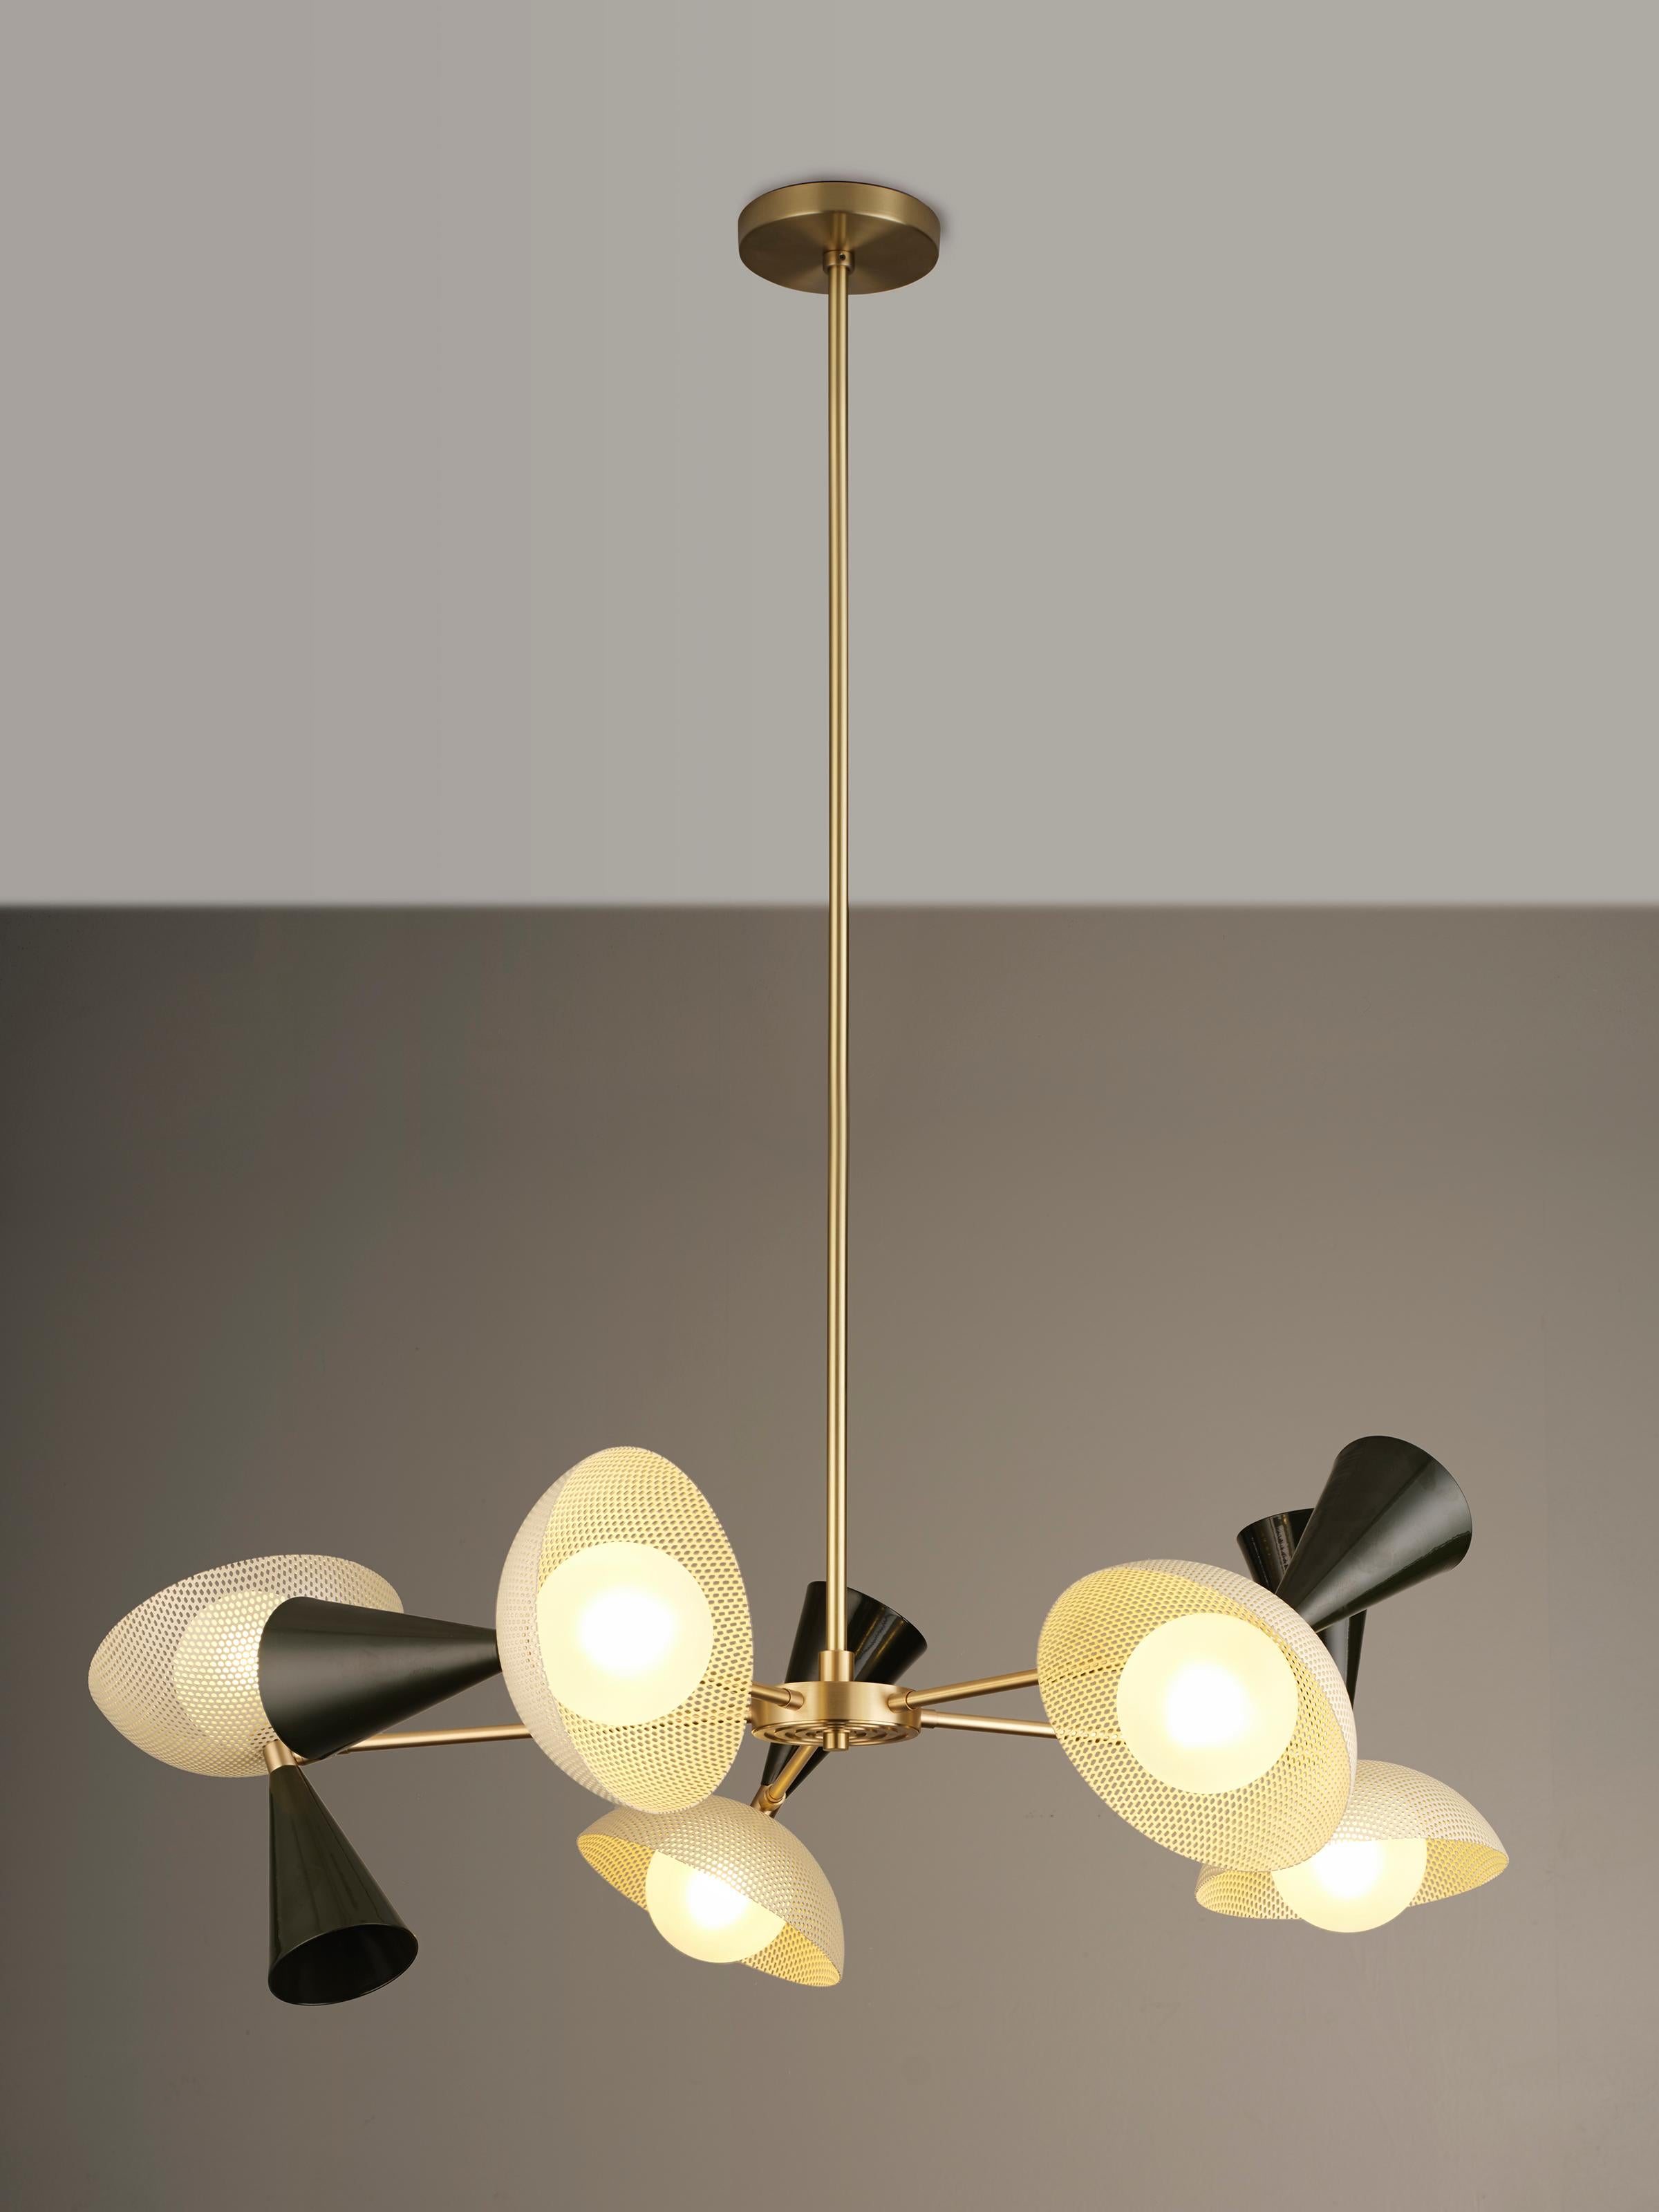 Aluminum Molto 5-Arm Ceiling Fixture in Brushed Brass + Enameled Mesh, Blueprint Lighting For Sale